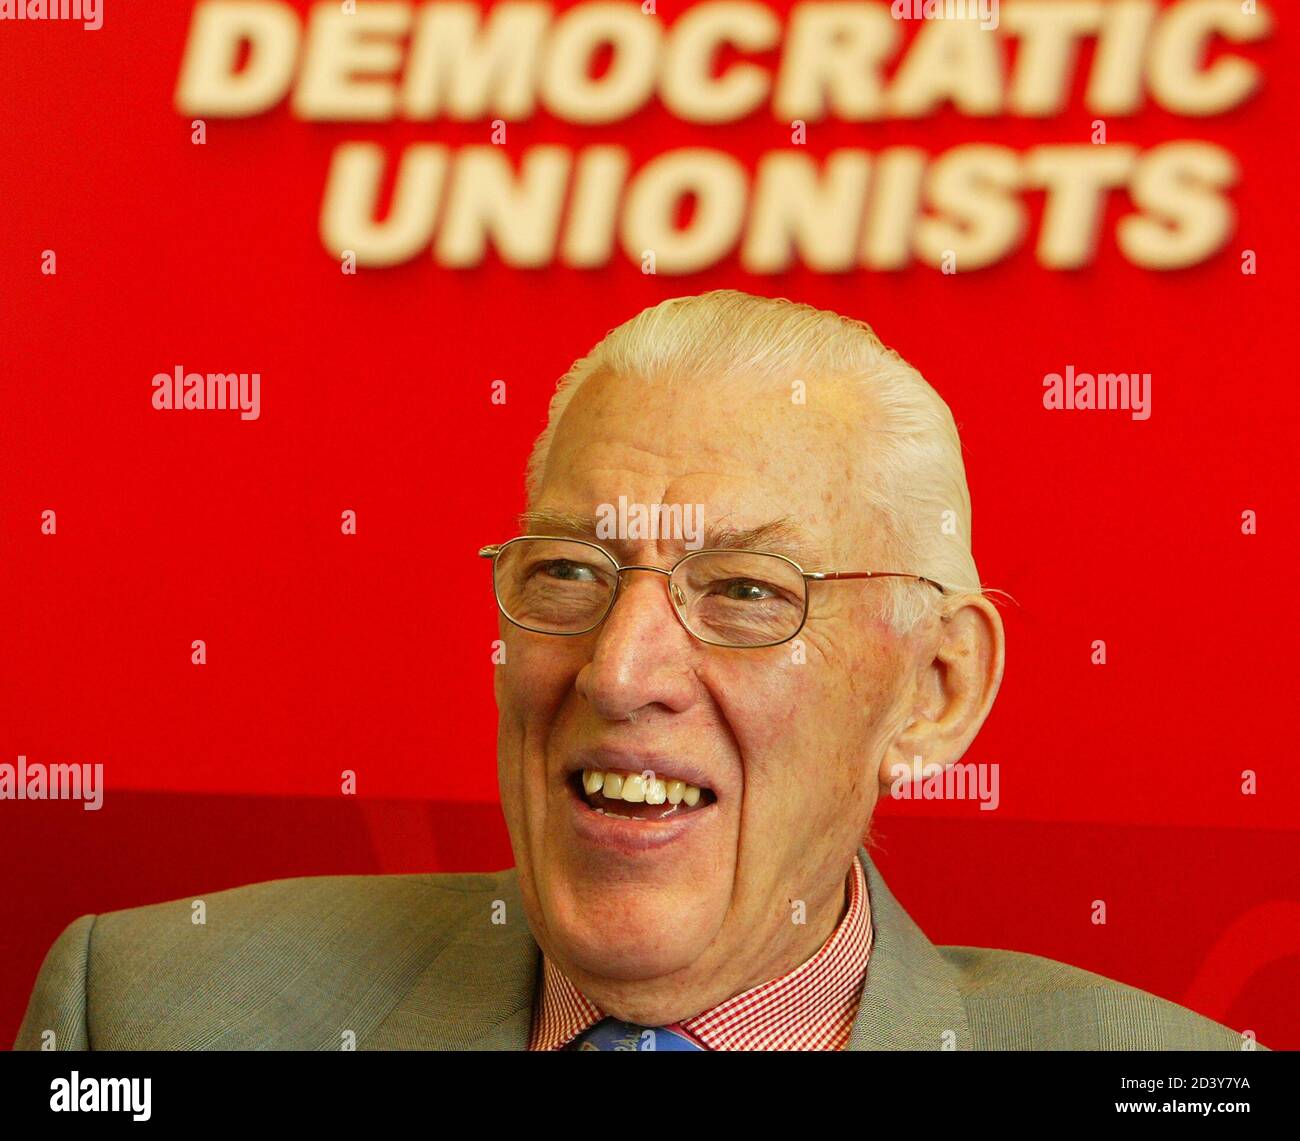 Democratic Unionist Party (DUP) leader Dr Ian Paisley smiles as he talks to the media at DUP headquarters in Belfast during elections to the Northern Ireland powersharing assembly, November 28, 2003. Britain's worst case scenario in Northern Ireland's election loomed on Friday as hardline Protestants opposed to a 1998 peace pact and their arch-foes, Catholics allied to the IRA, led the count. REUTERS/Peter Macdiarmid  PKM/ASA/THI Stock Photo